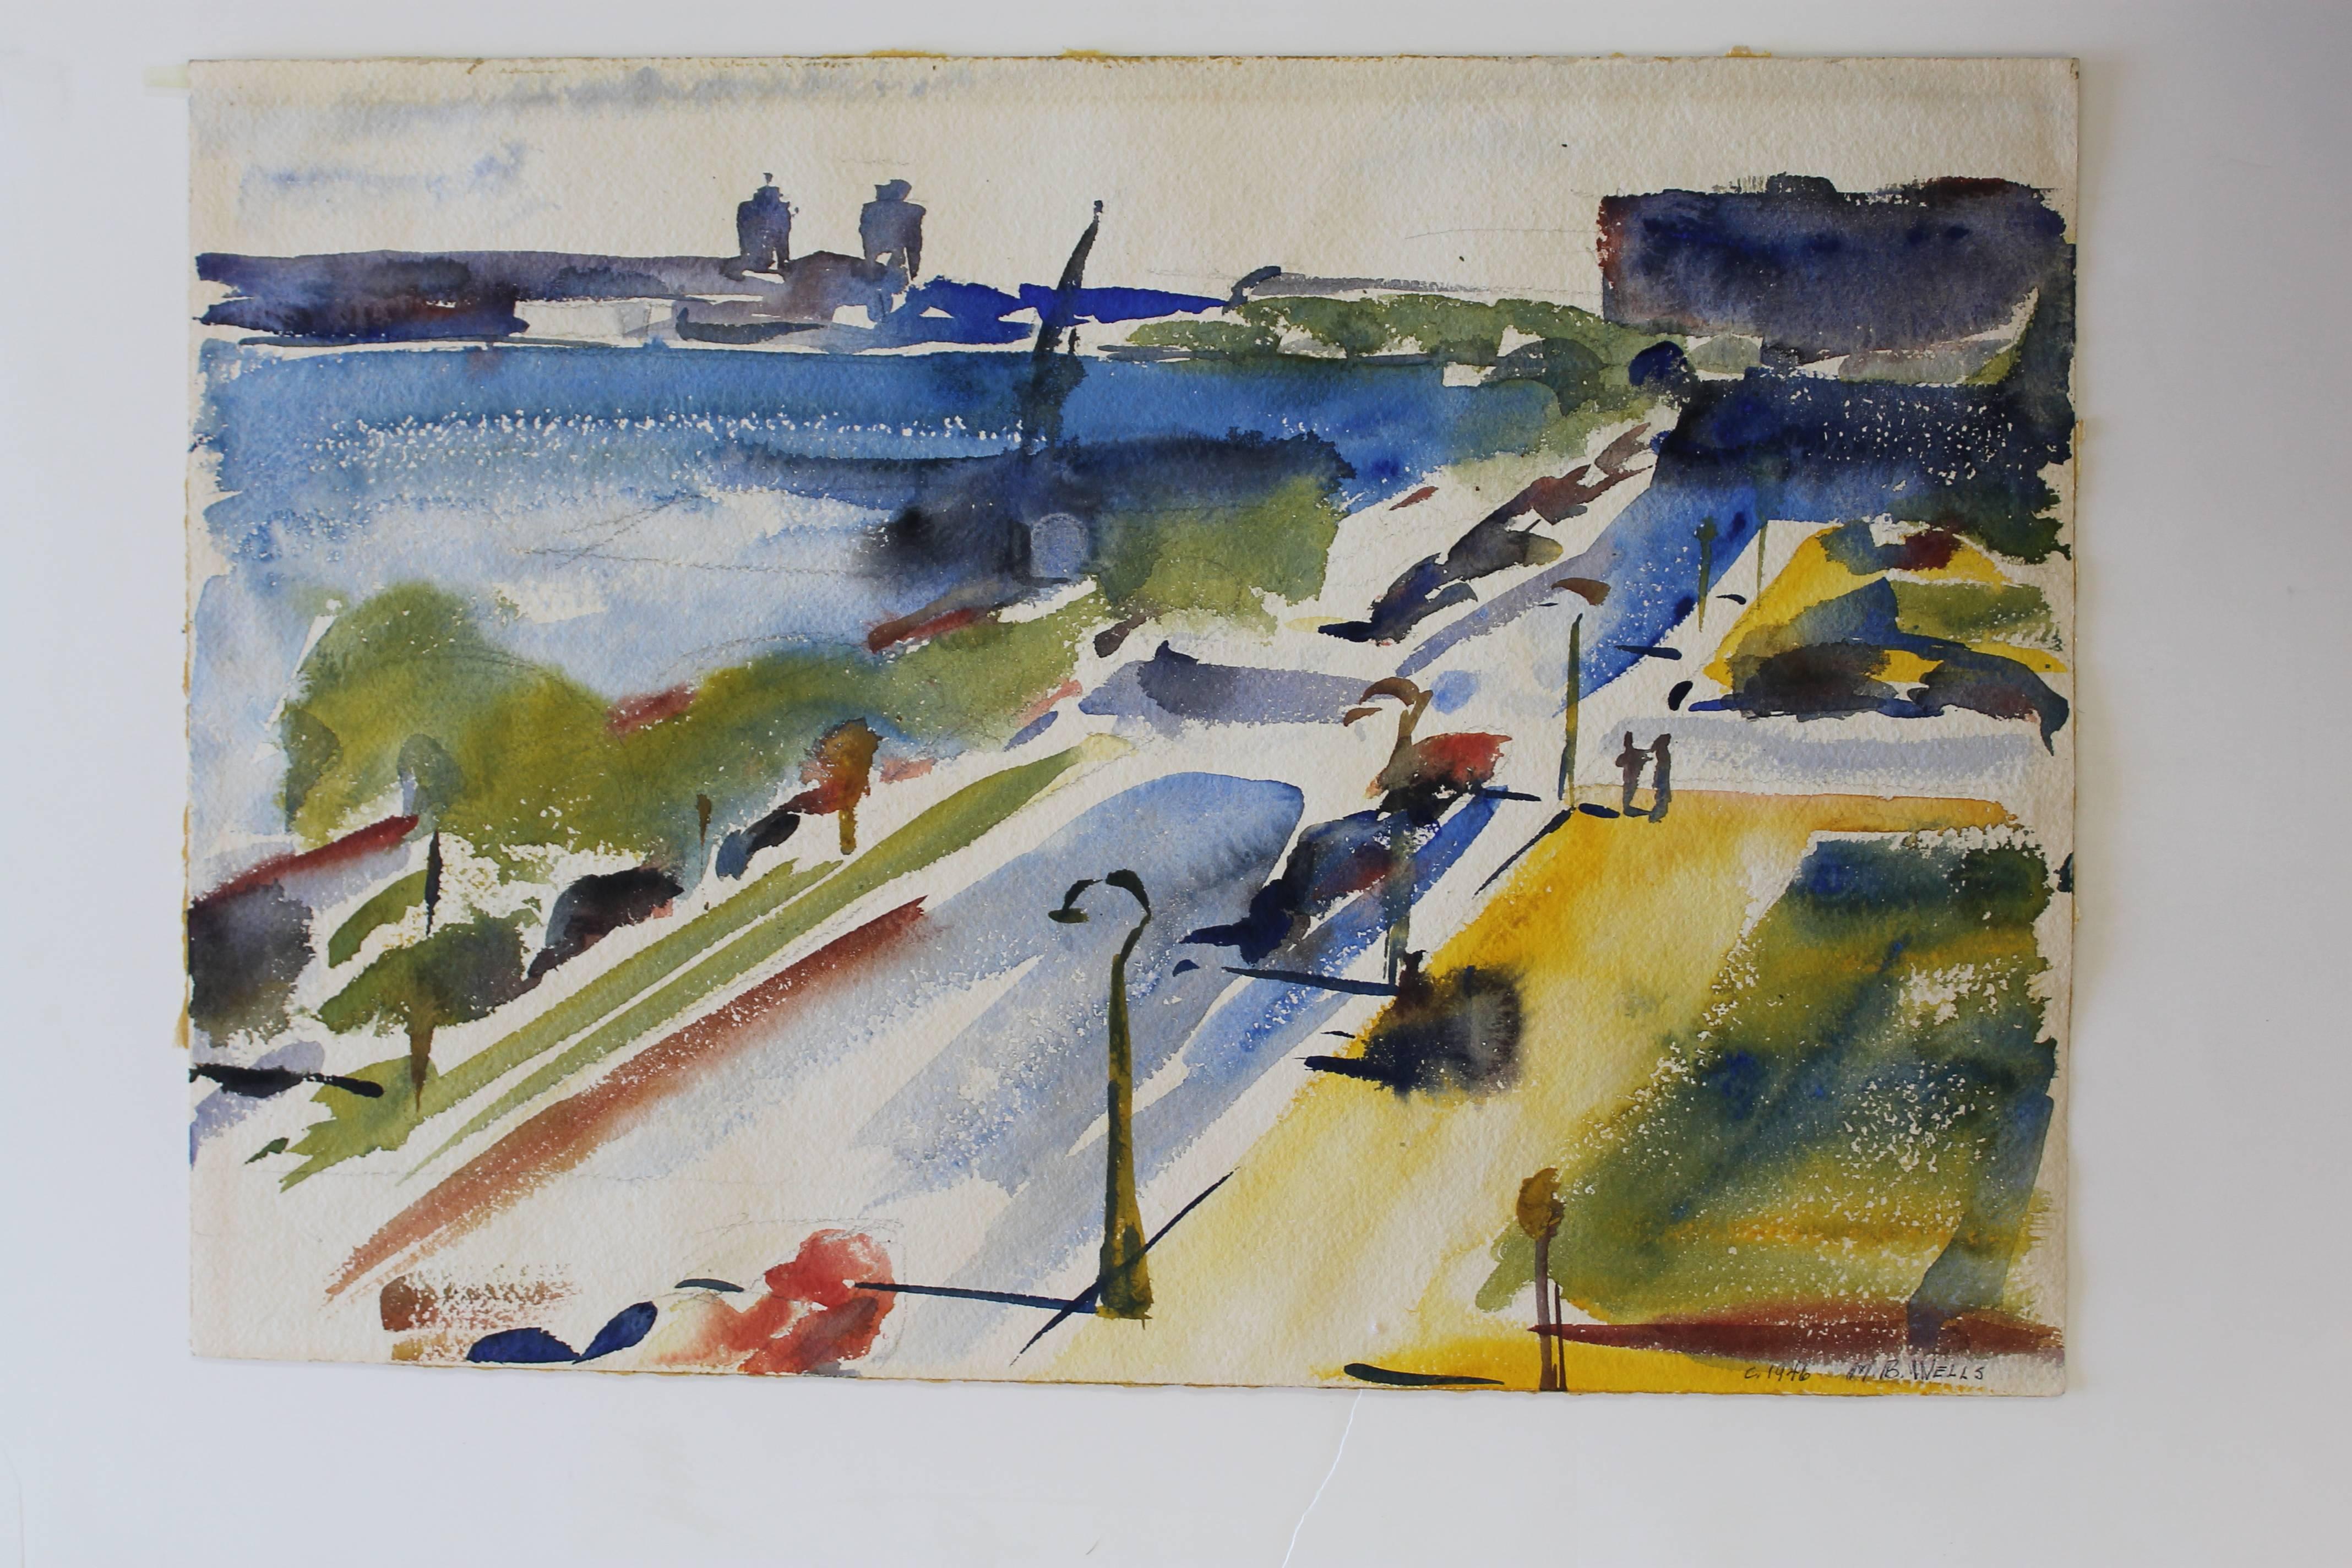 Mason Wells (1906-1984) watercolor dated 1946 and shows view of 936 Lake Shore Drive.
Mason Bacheller Wells was born in Southbridge, Massachusetts, attended Harvard, Yale and San Francisco Art Institute. He was active/lived in California,